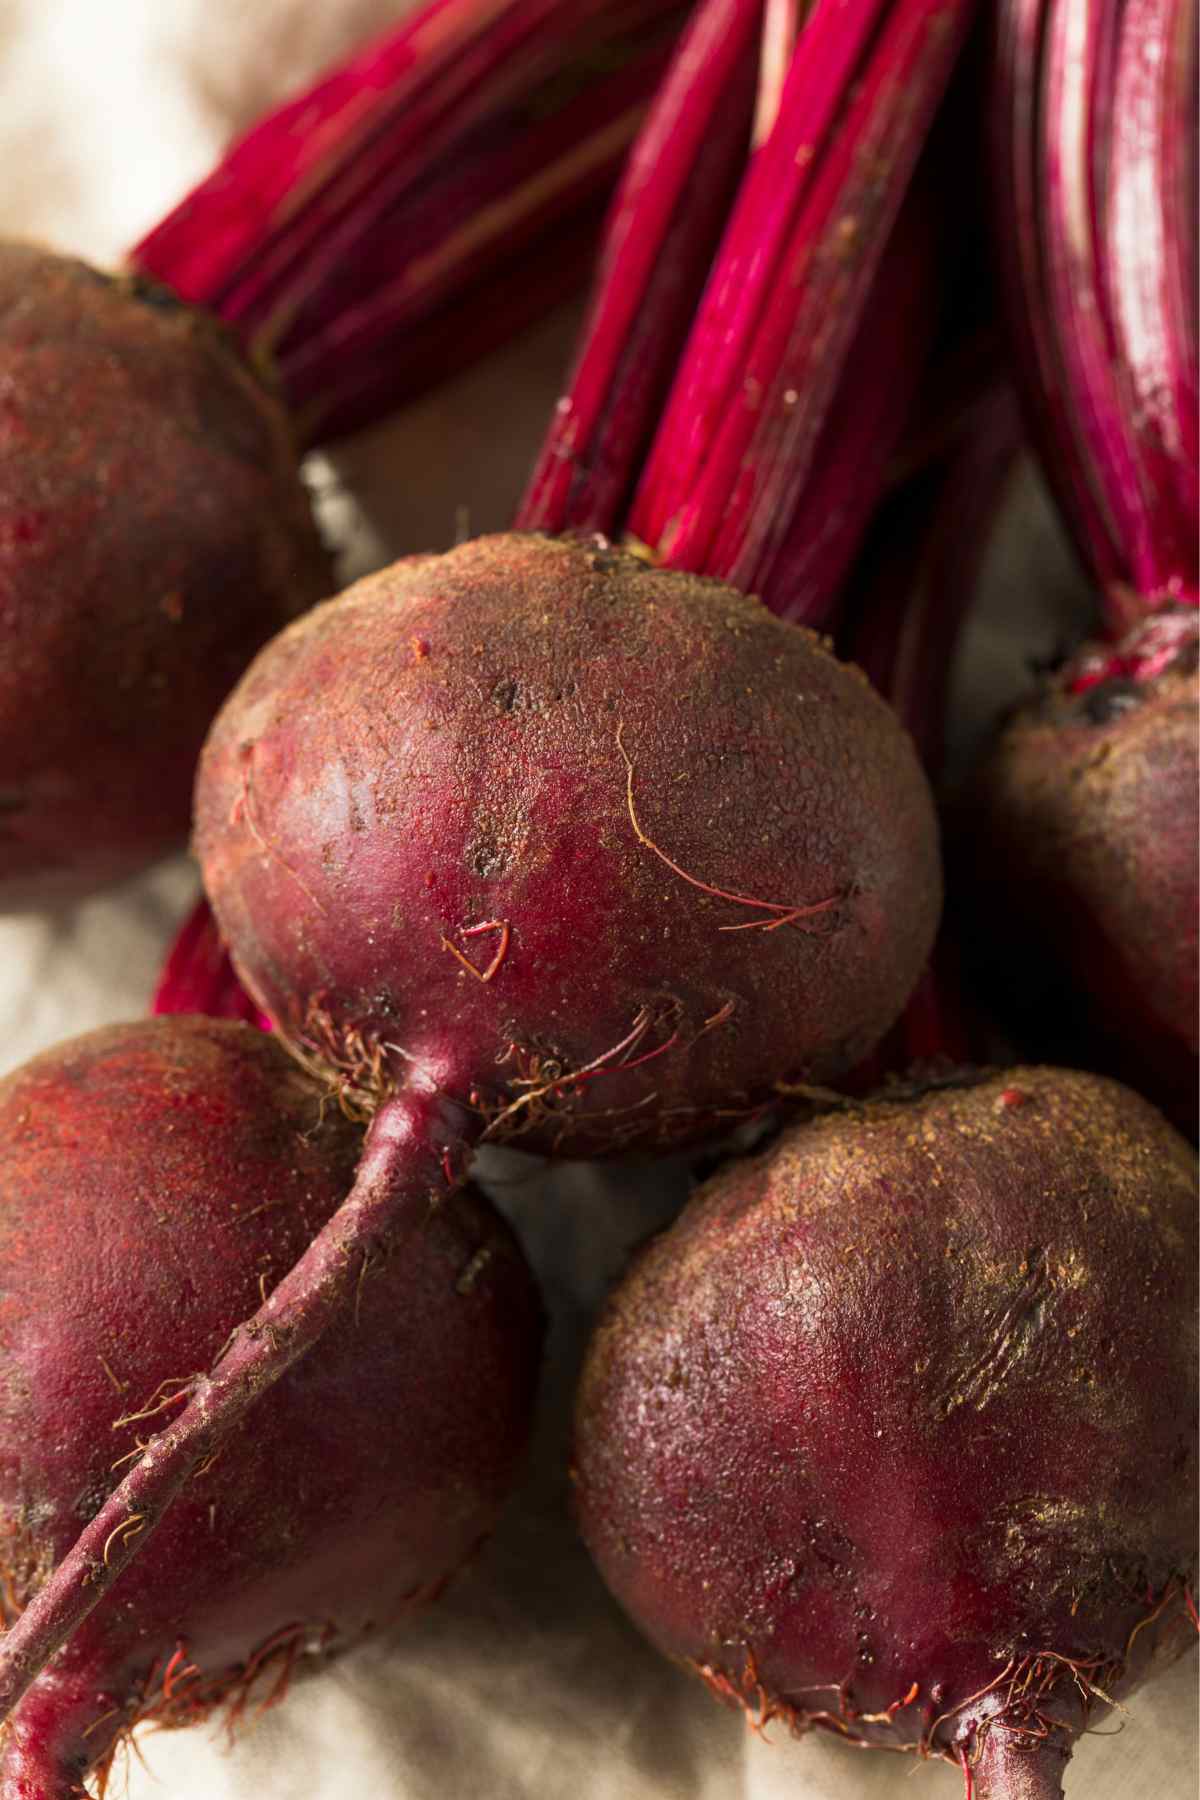 Beets are a rich source of vitamins and minerals and have many health benefits. However, they are also high in carbs, which can make it difficult to fit them into a low-carb diet like keto. In this post, you’ll learn whether beets are keto-friendly, how many net carbs they contain, and how you can incorporate them into your keto diet.